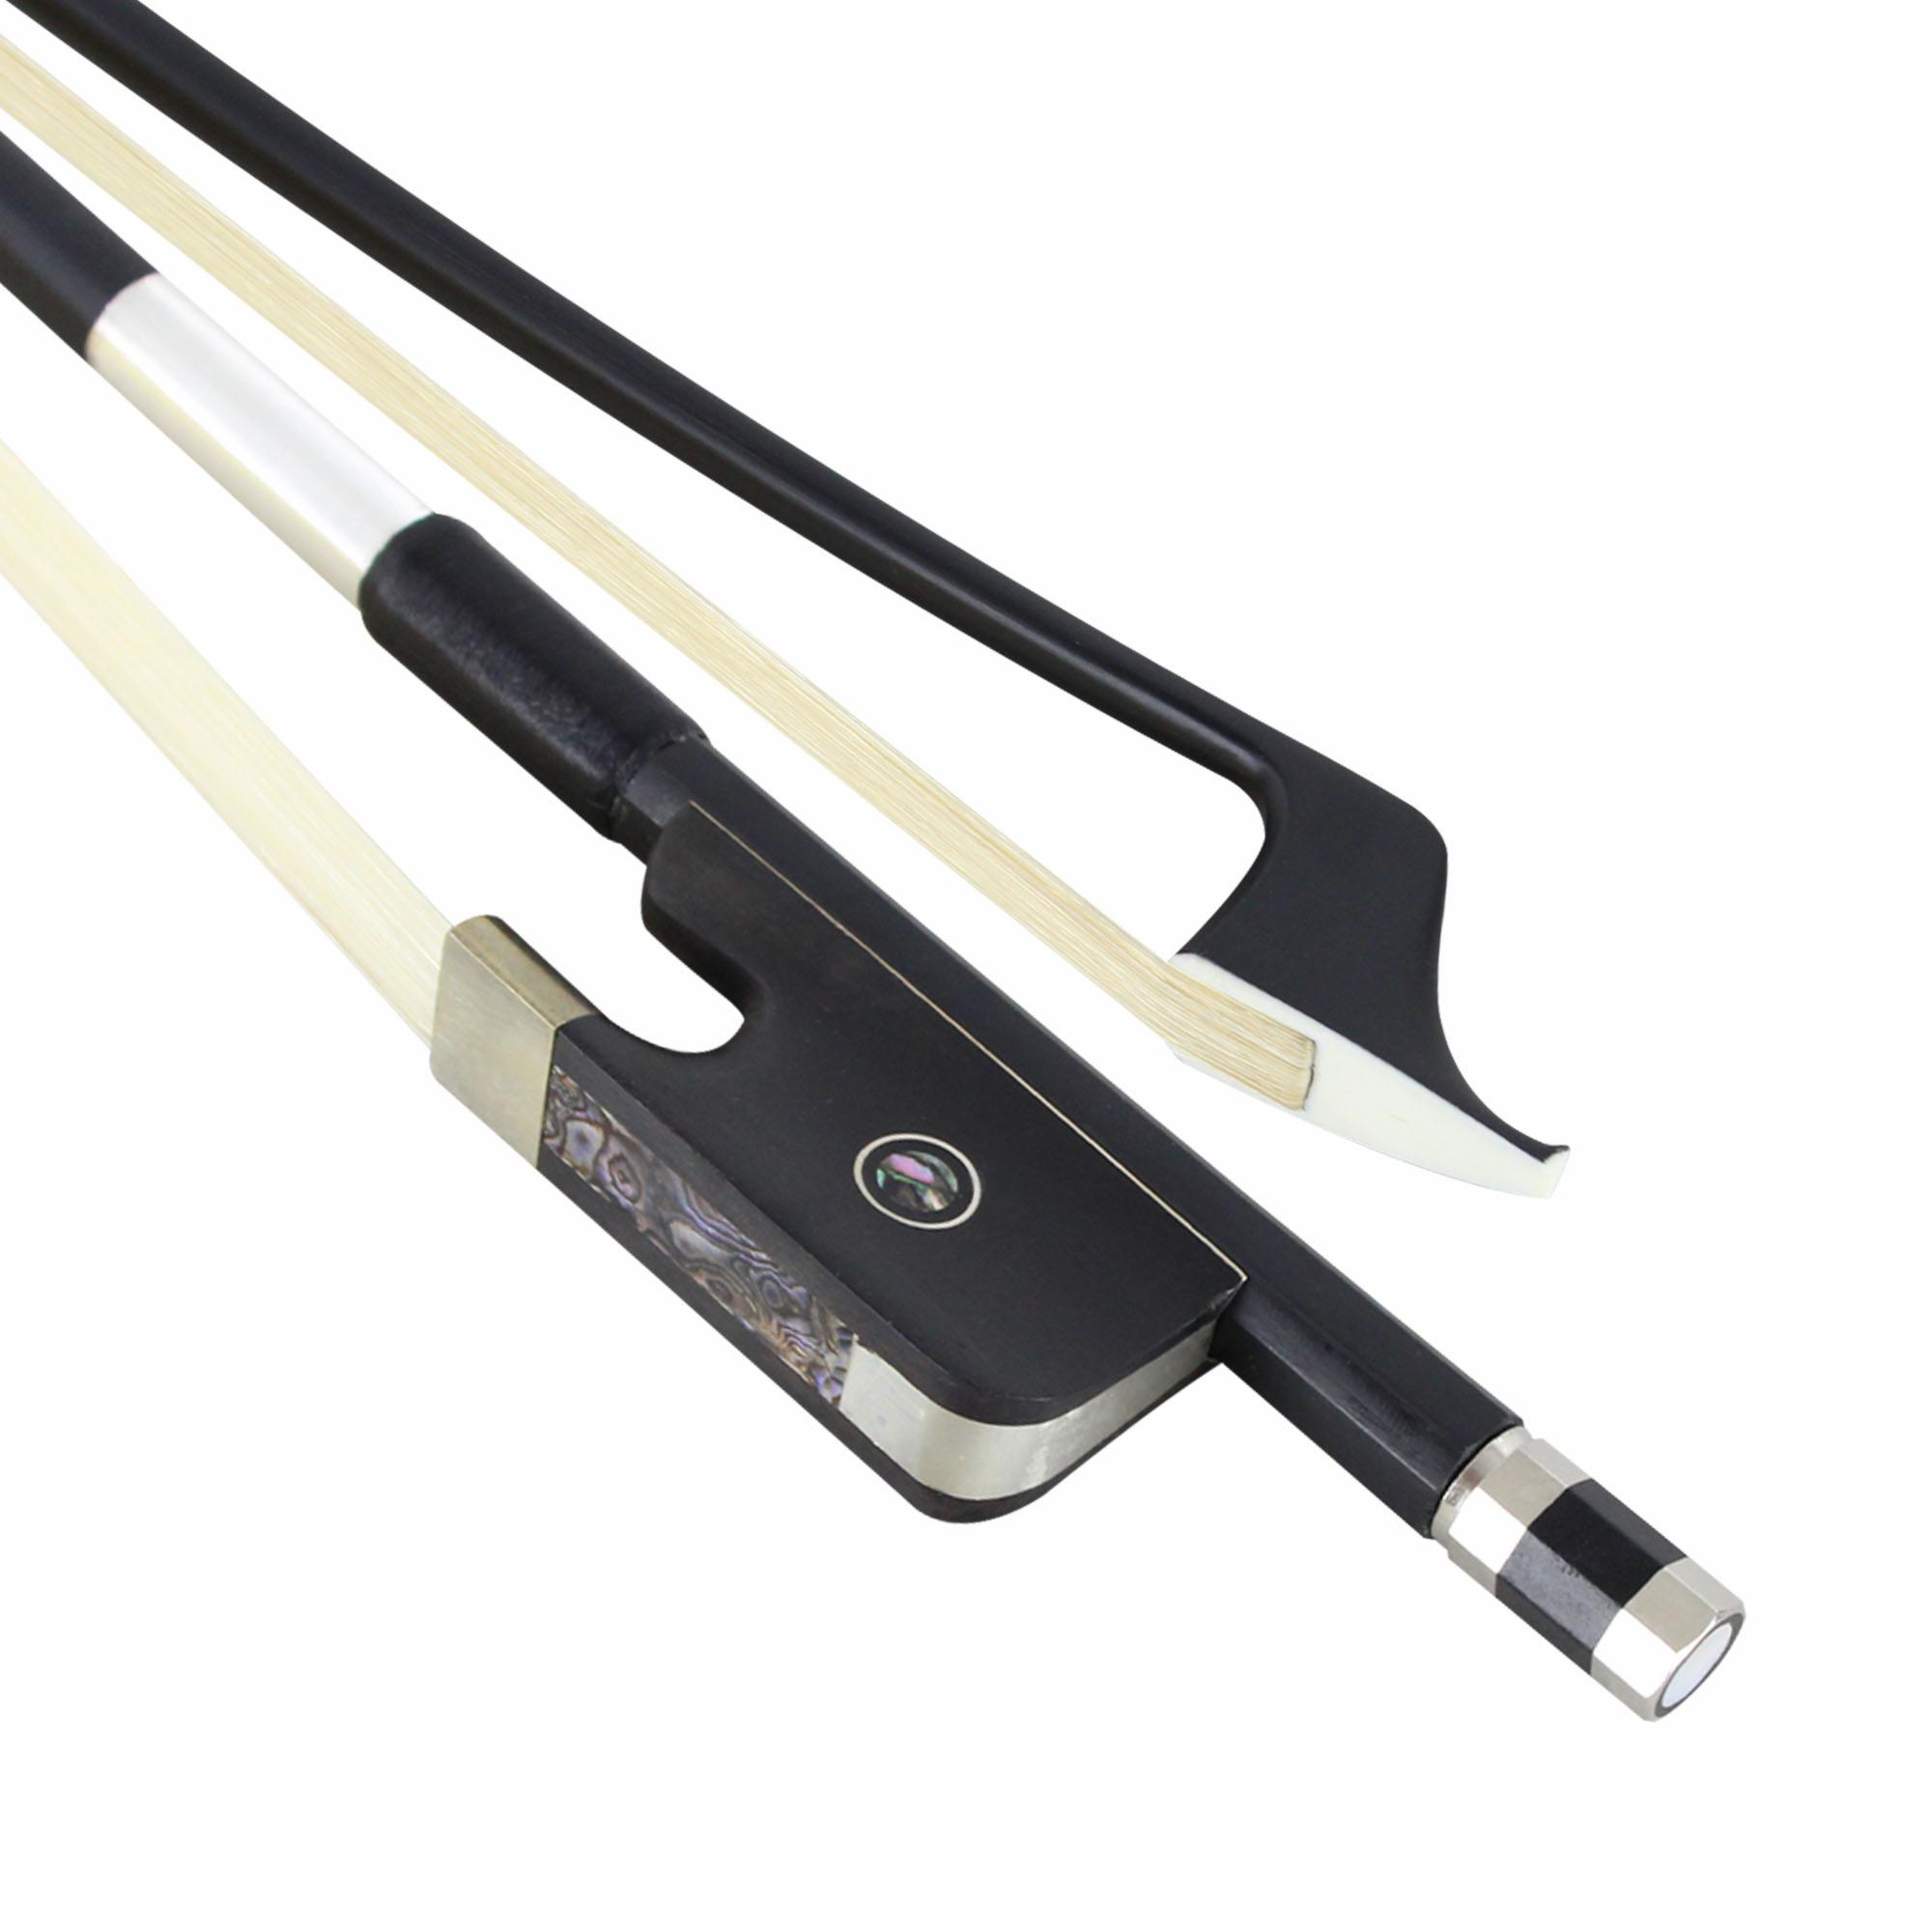 Stefano French or German Round Composite Bass Bow